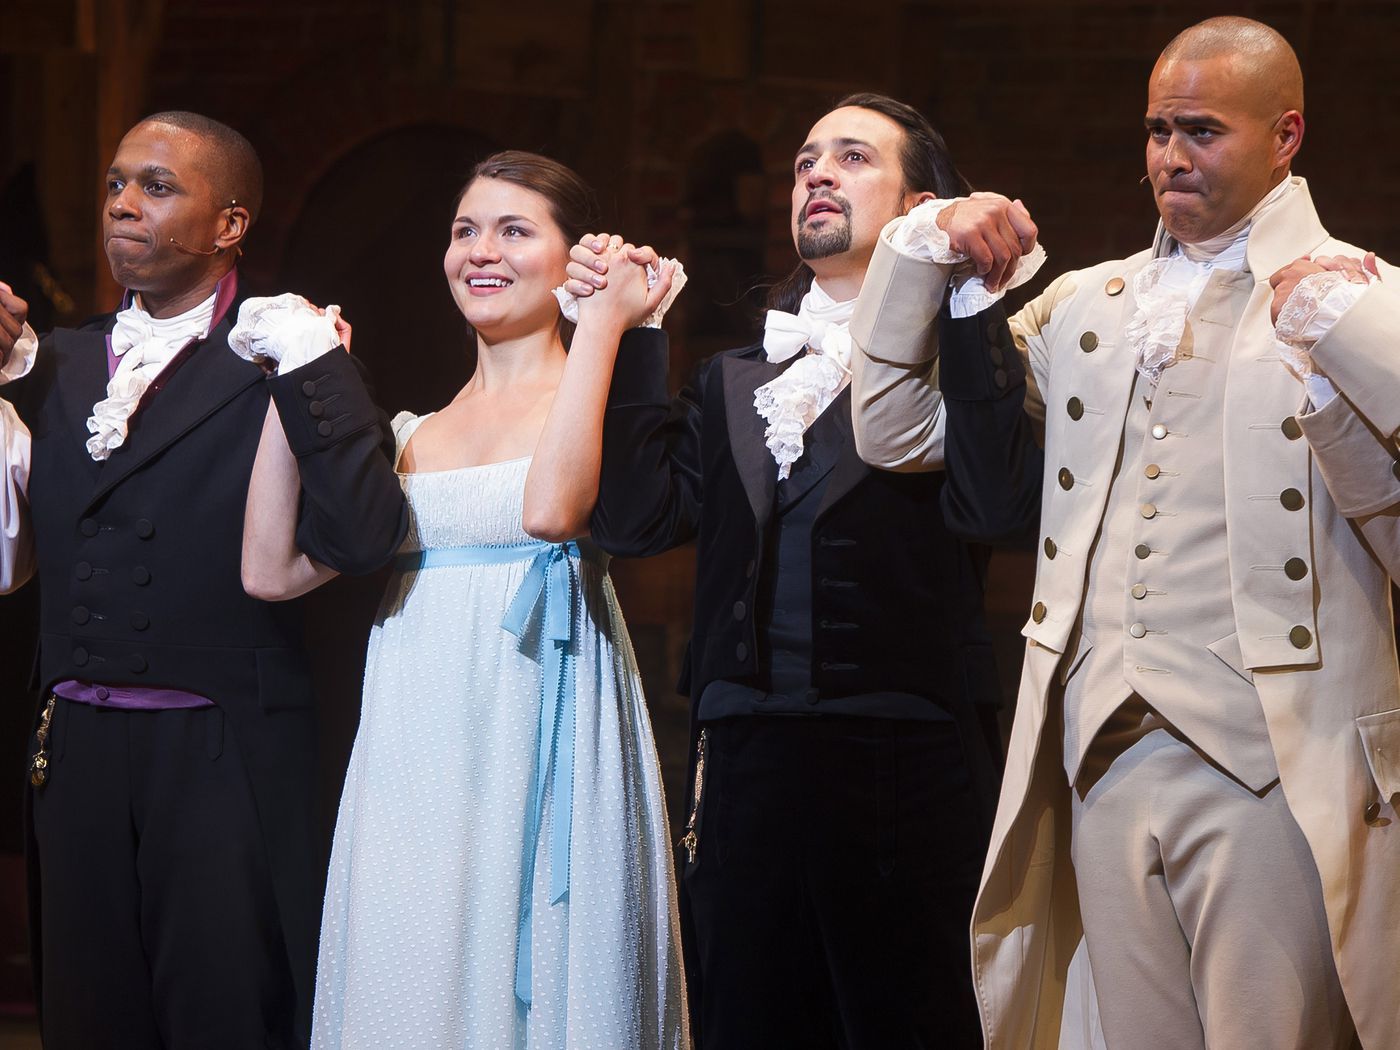 Hamilton': What Does Eliza's Gasp Mean? Here's What Lin Manuel Miranda Says